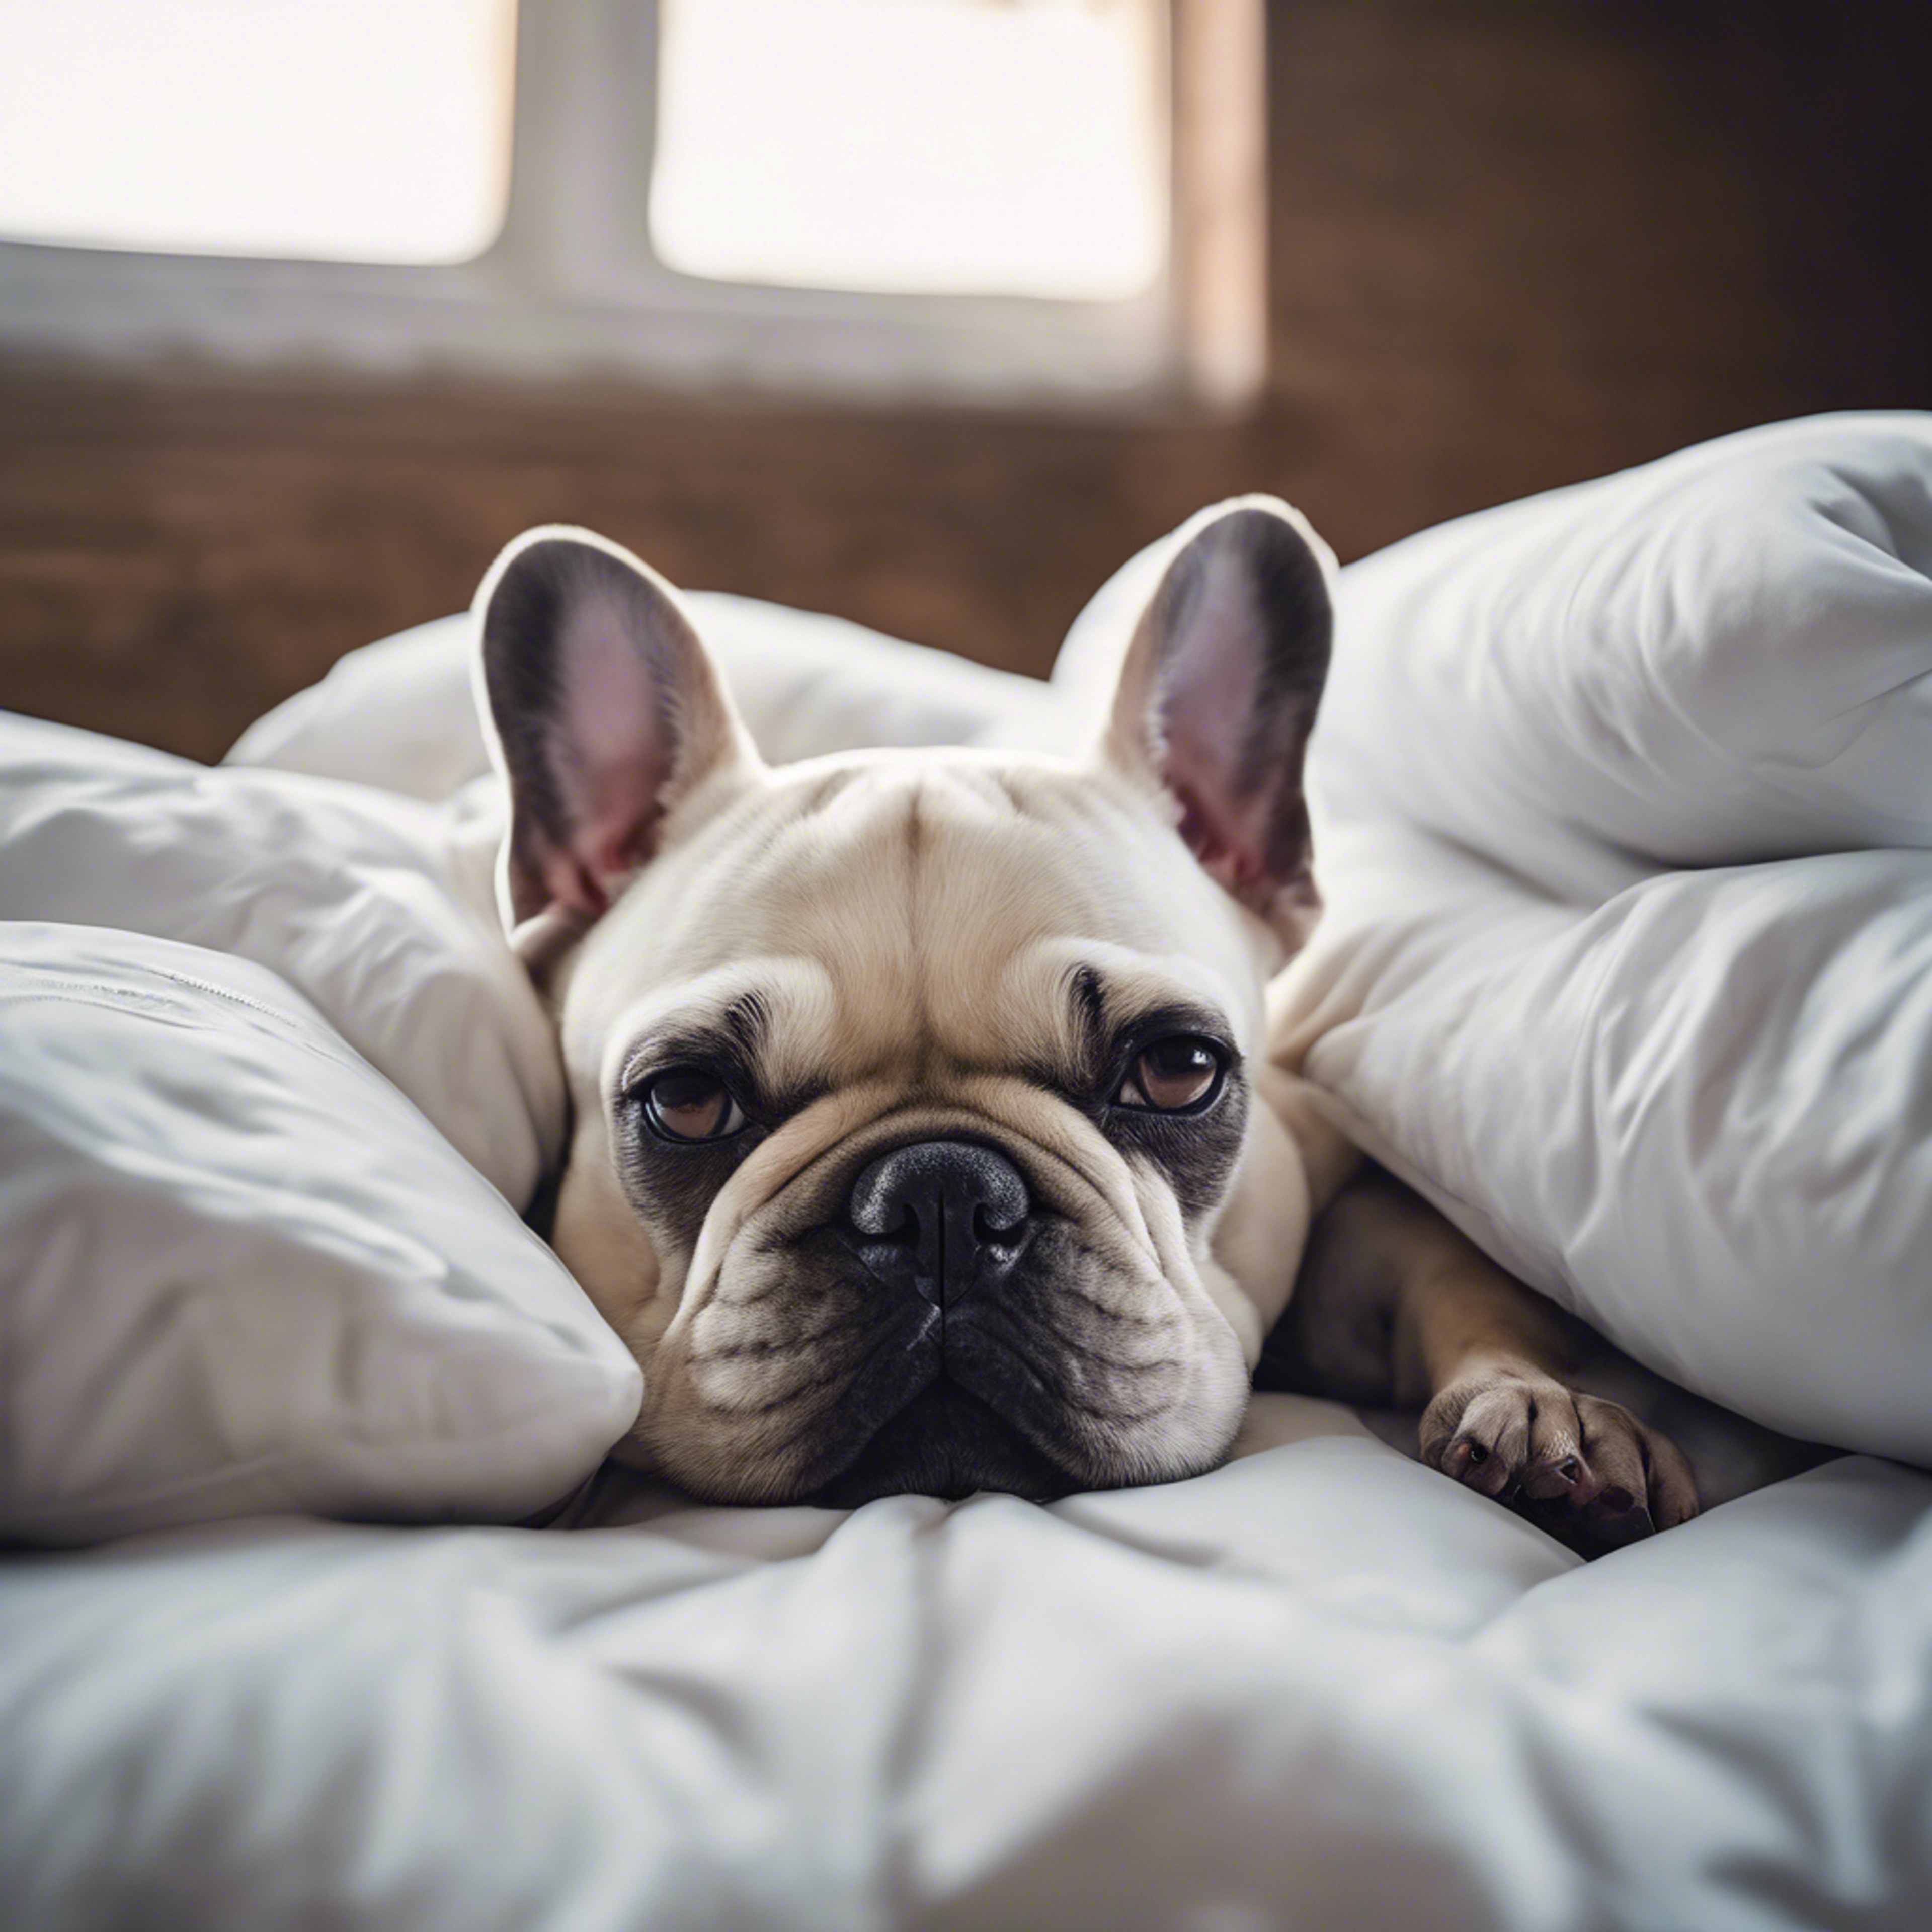 A young French Bulldog falling into a deep sleep, nestled into a pile of comfy pillows on a king-size bed. Kertas dinding[35e5ea00e17d41afbf2f]